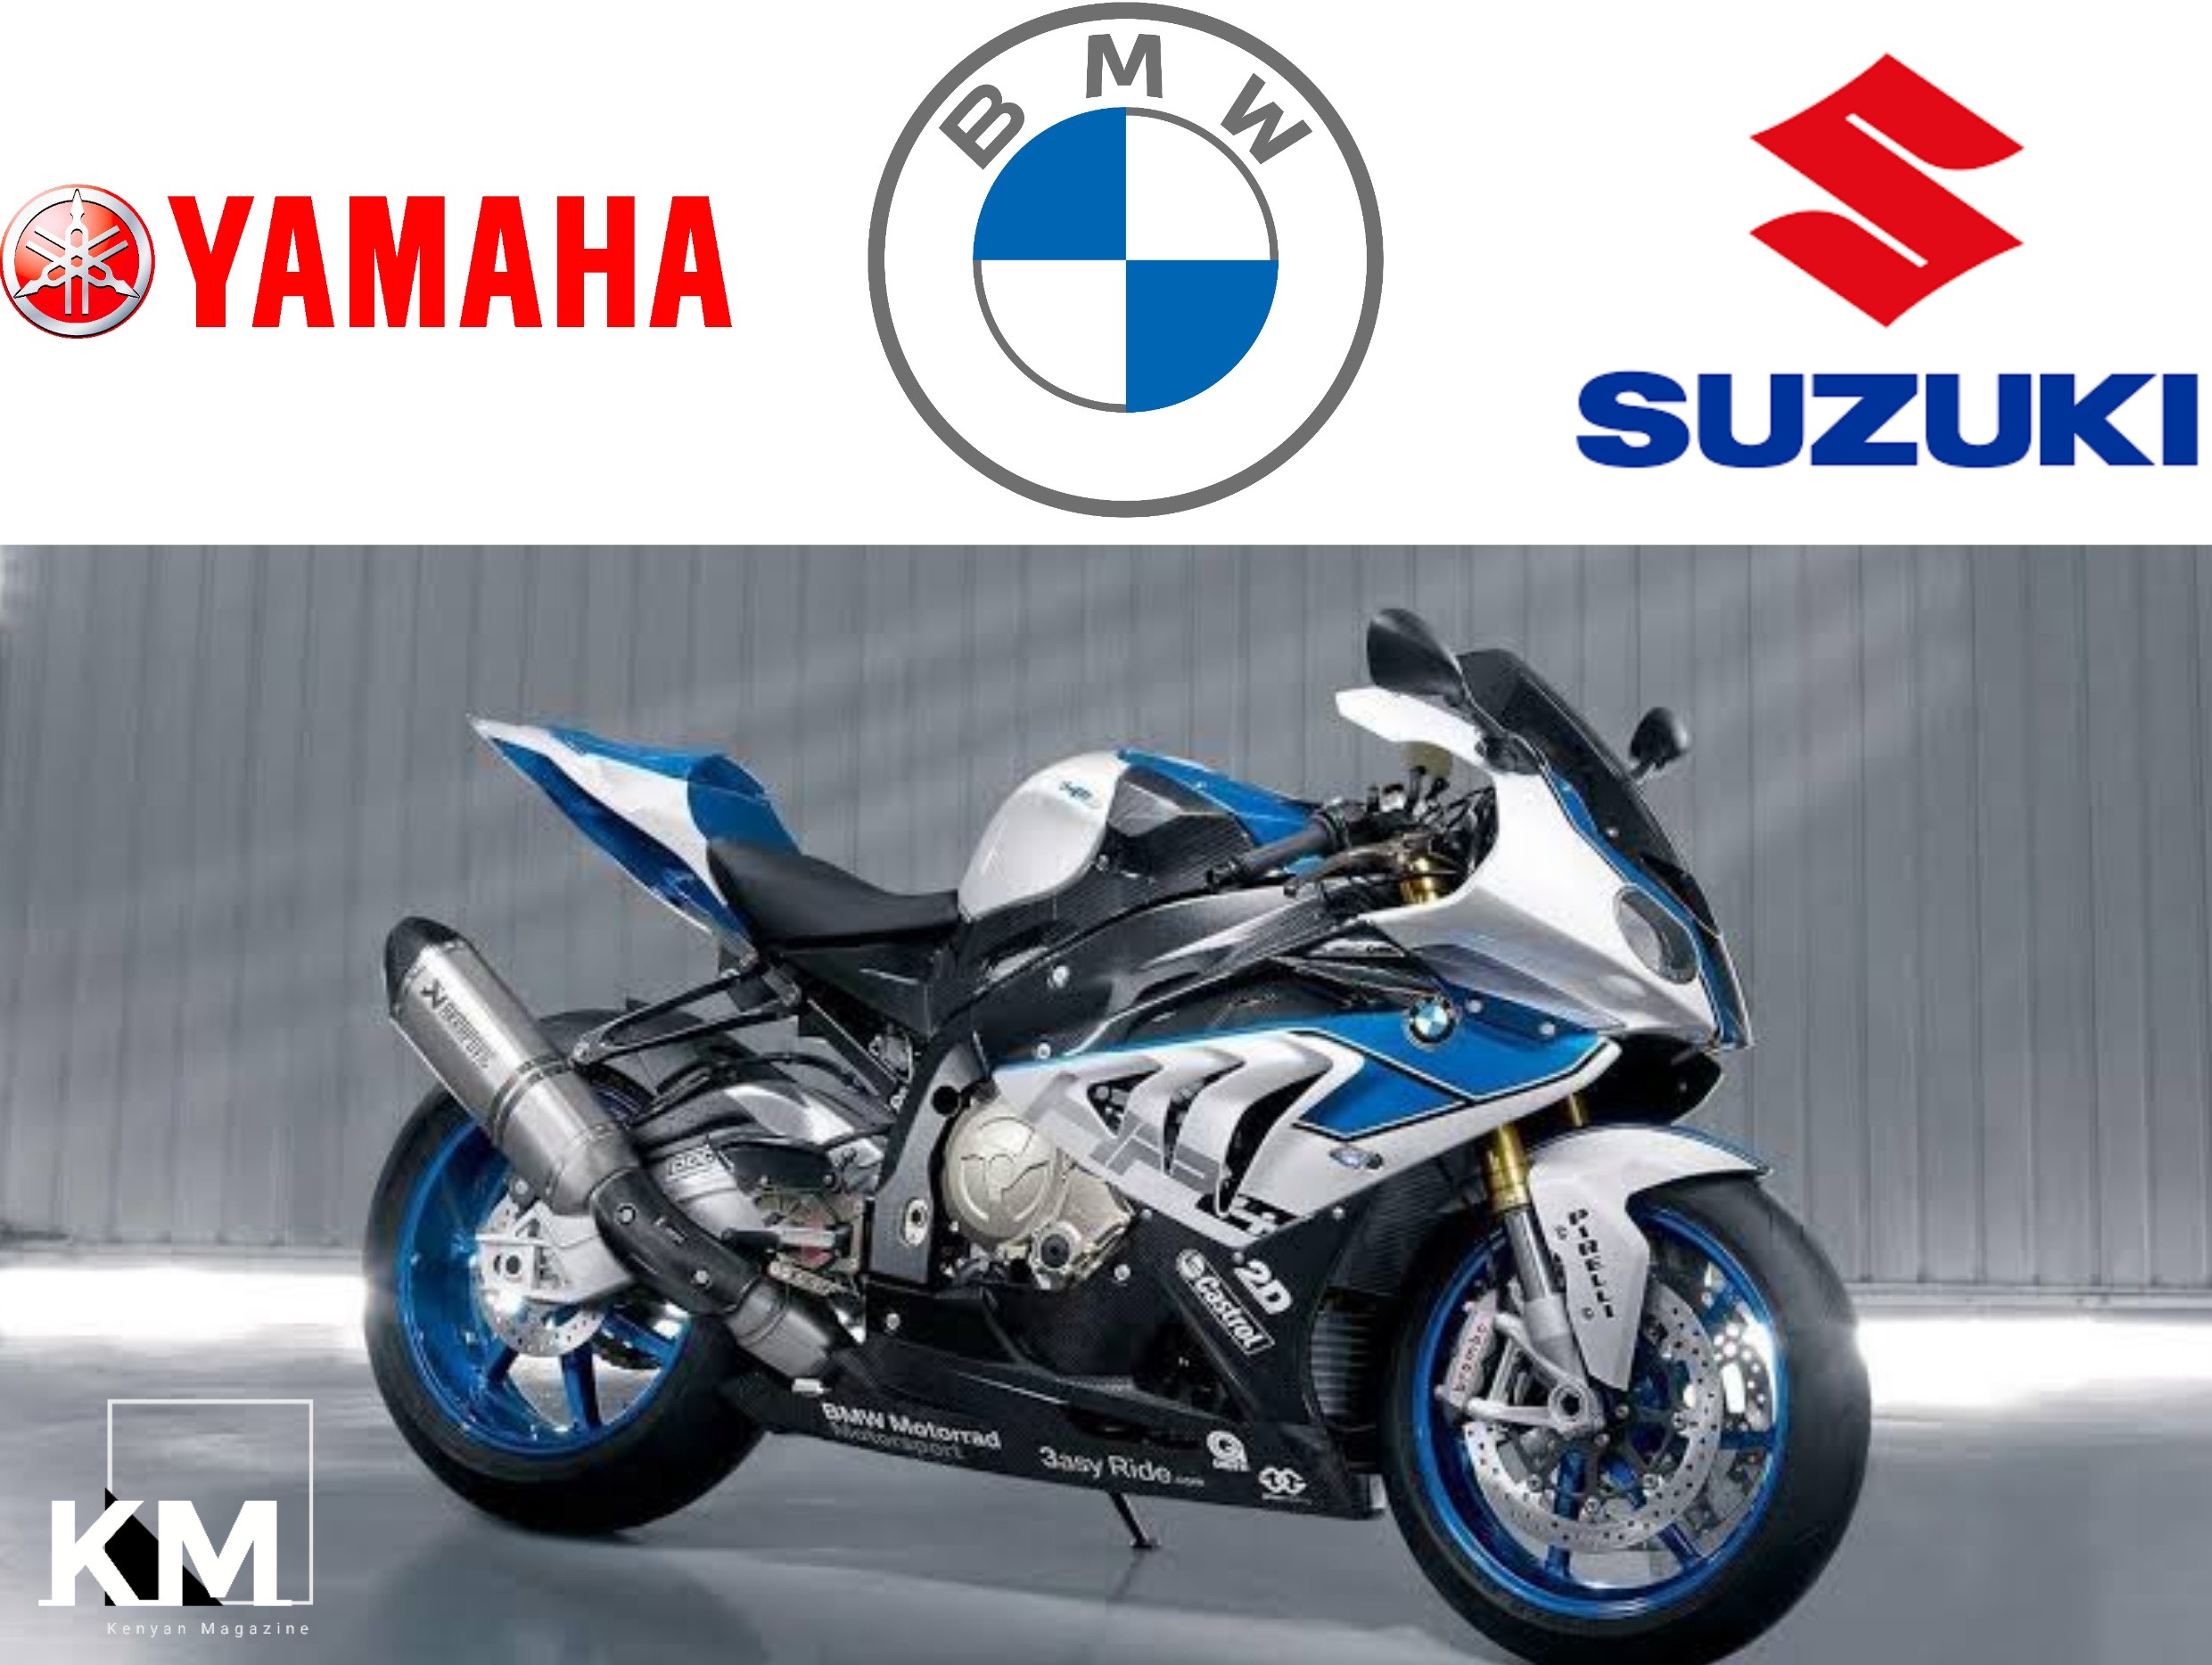 World's Most Expensive Motorcycle Brands